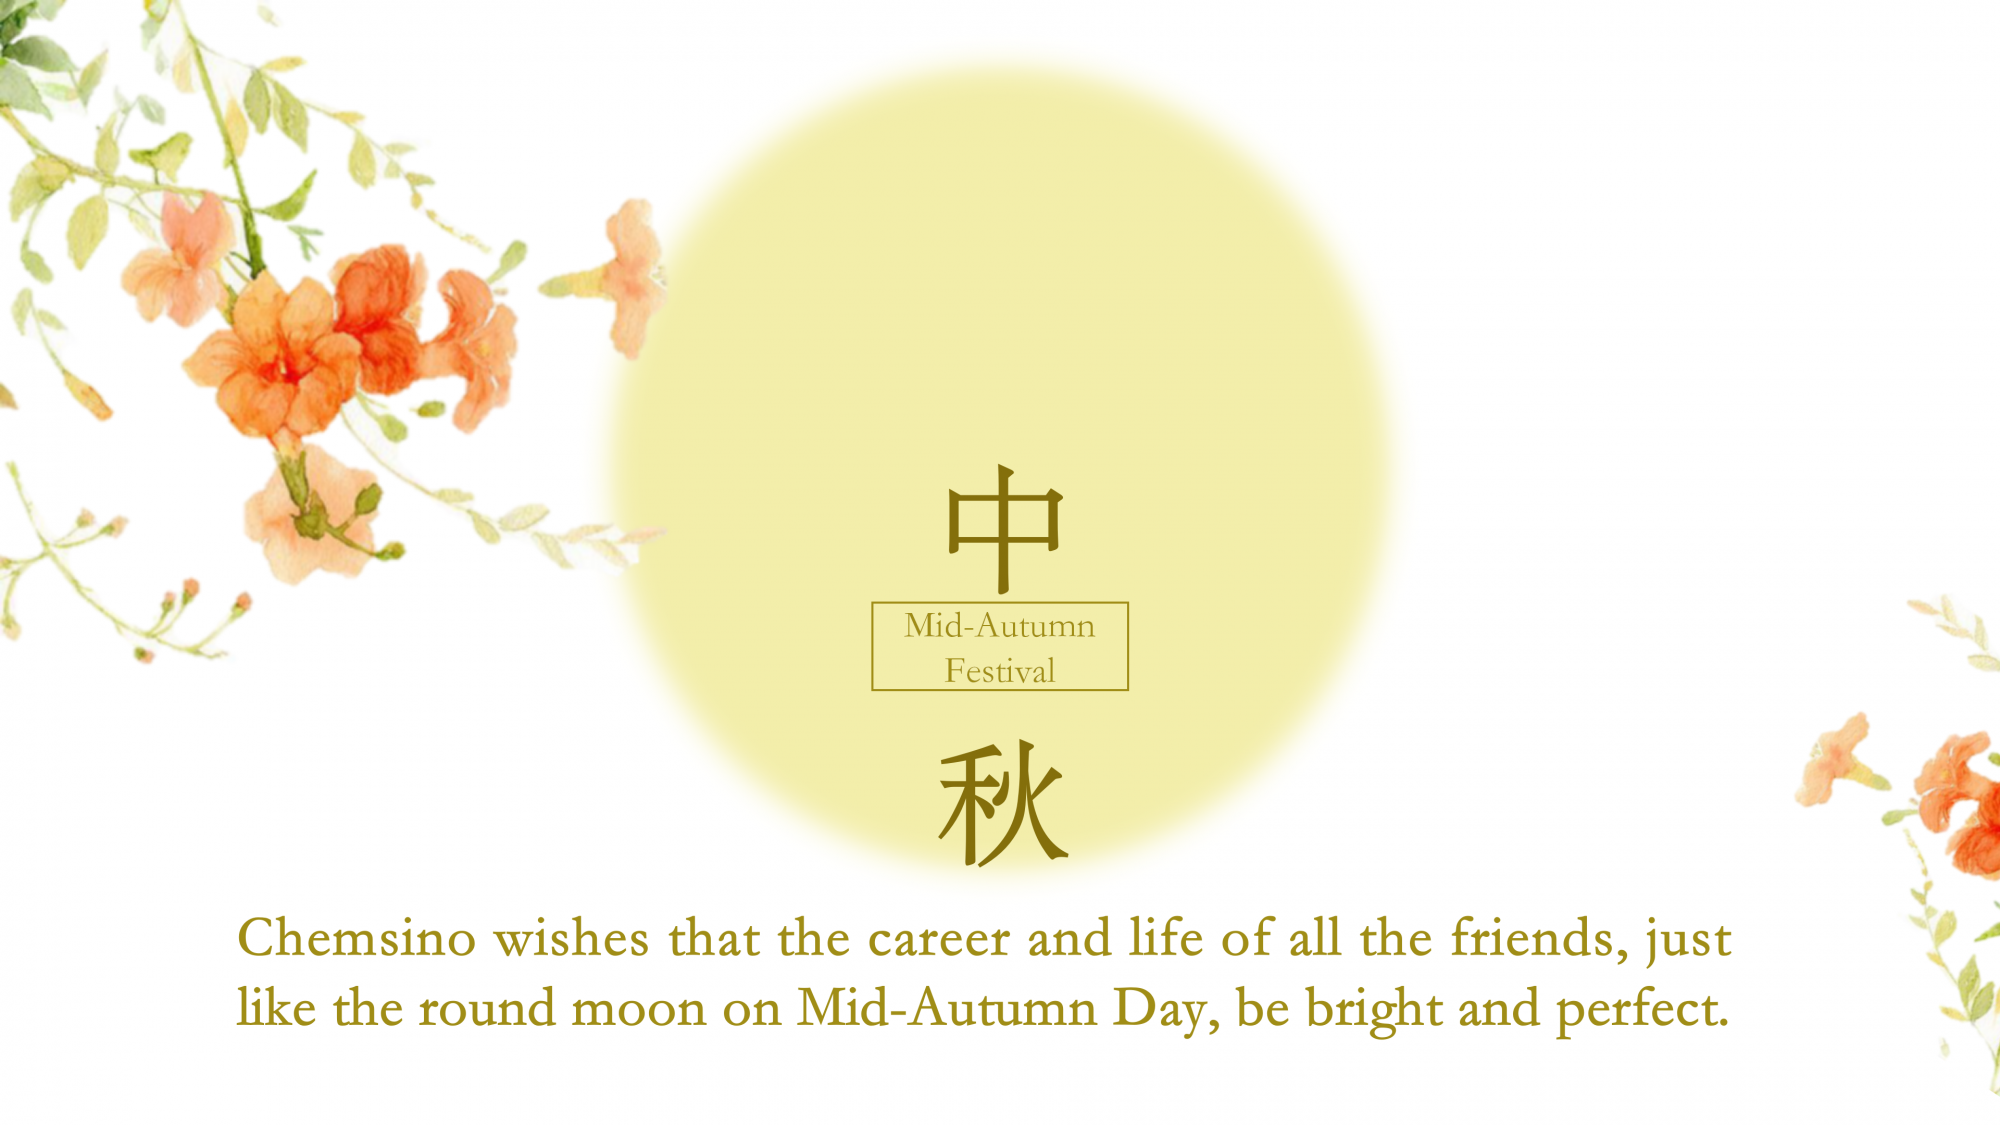 Happy Middle-Autumn Day to all the friends